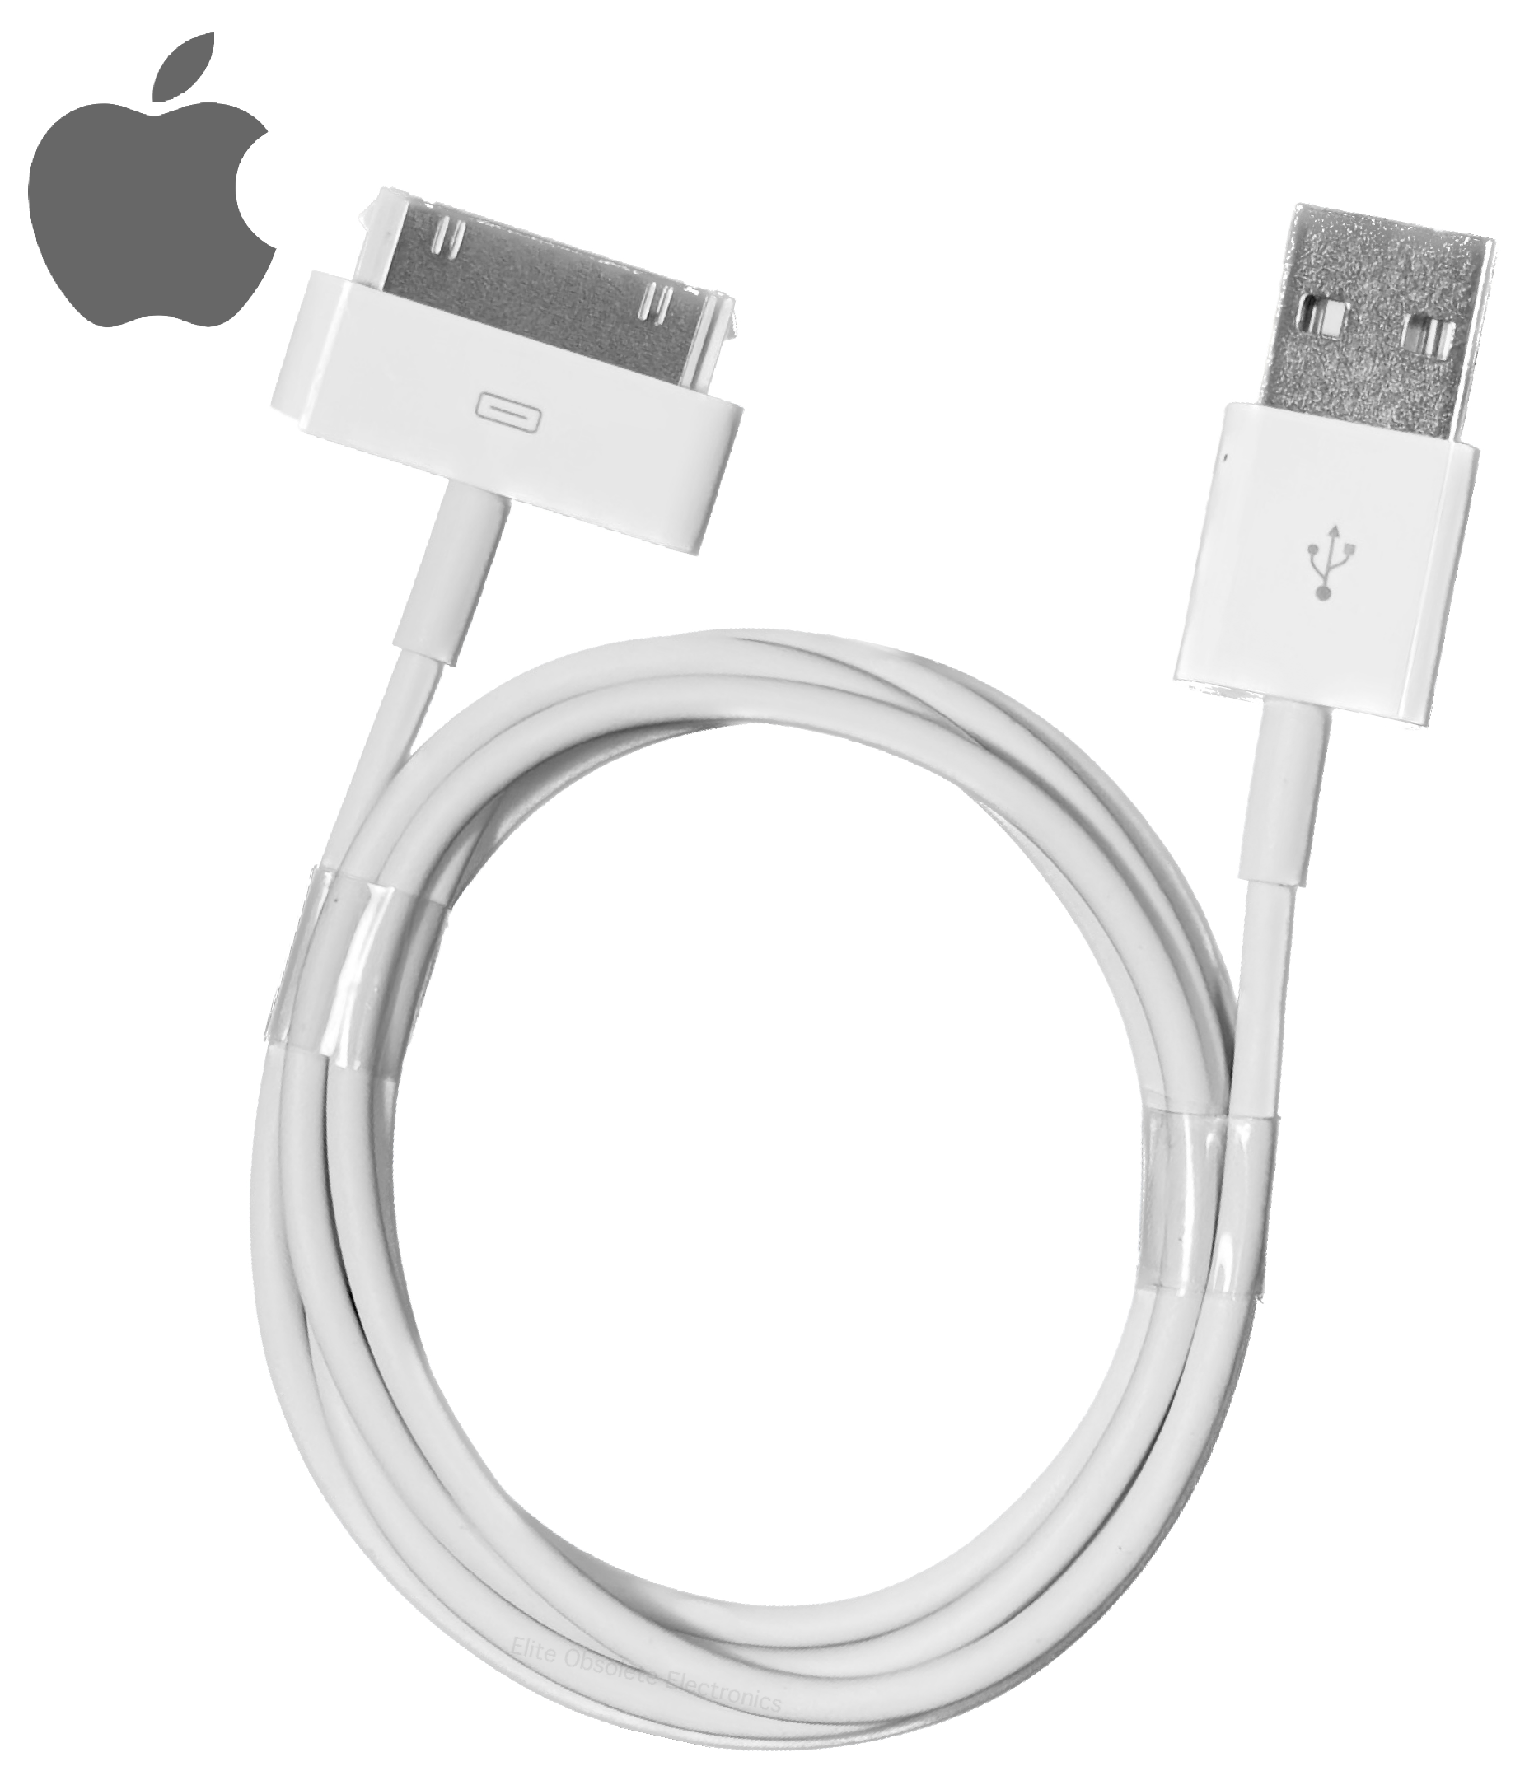 New Genuine Apple 30-Pin USB Charge Sync & Audio Cable for iPod MA591G/C